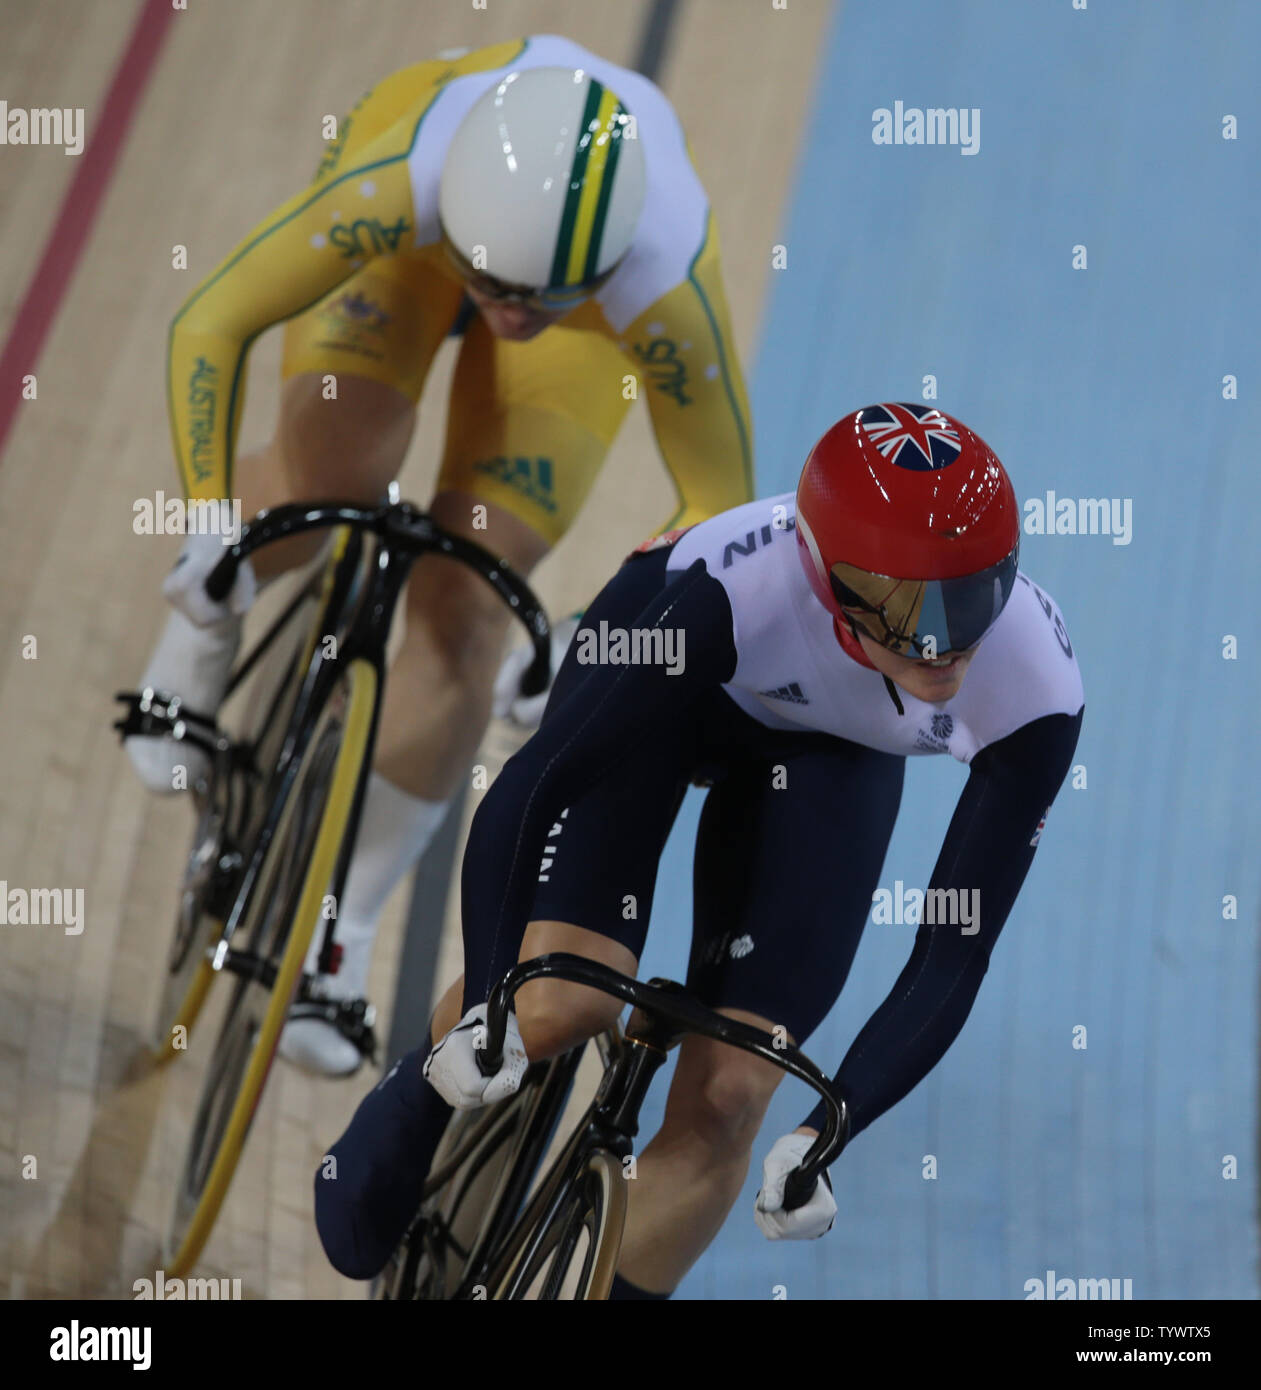 Australia's Anna Meares races against Great Britain's Victoria Pendleton in the Final of the Women's Sprint at the Velodrome at the London 2012 Summer Olympics on August 7, 2012 in London.     UPI/Hugo Philpott Stock Photo